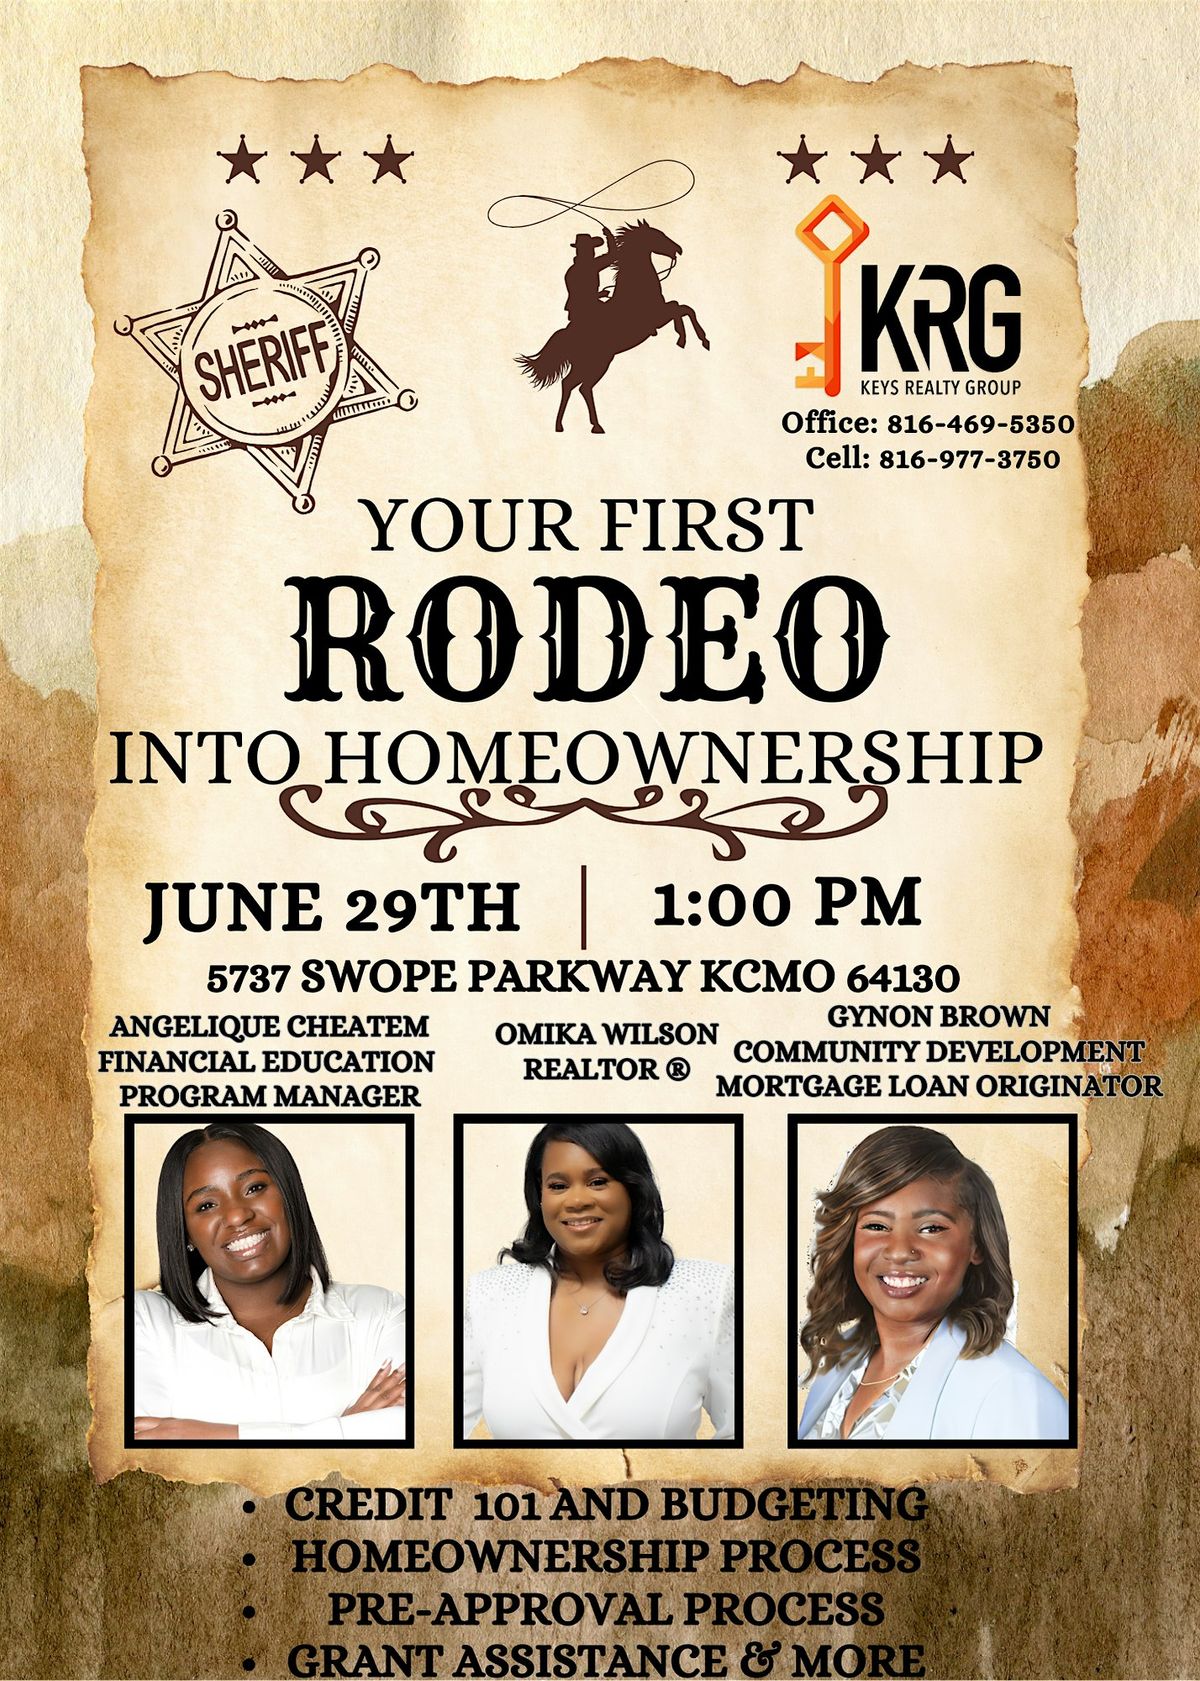 Your First Rodeo Into Homeownership